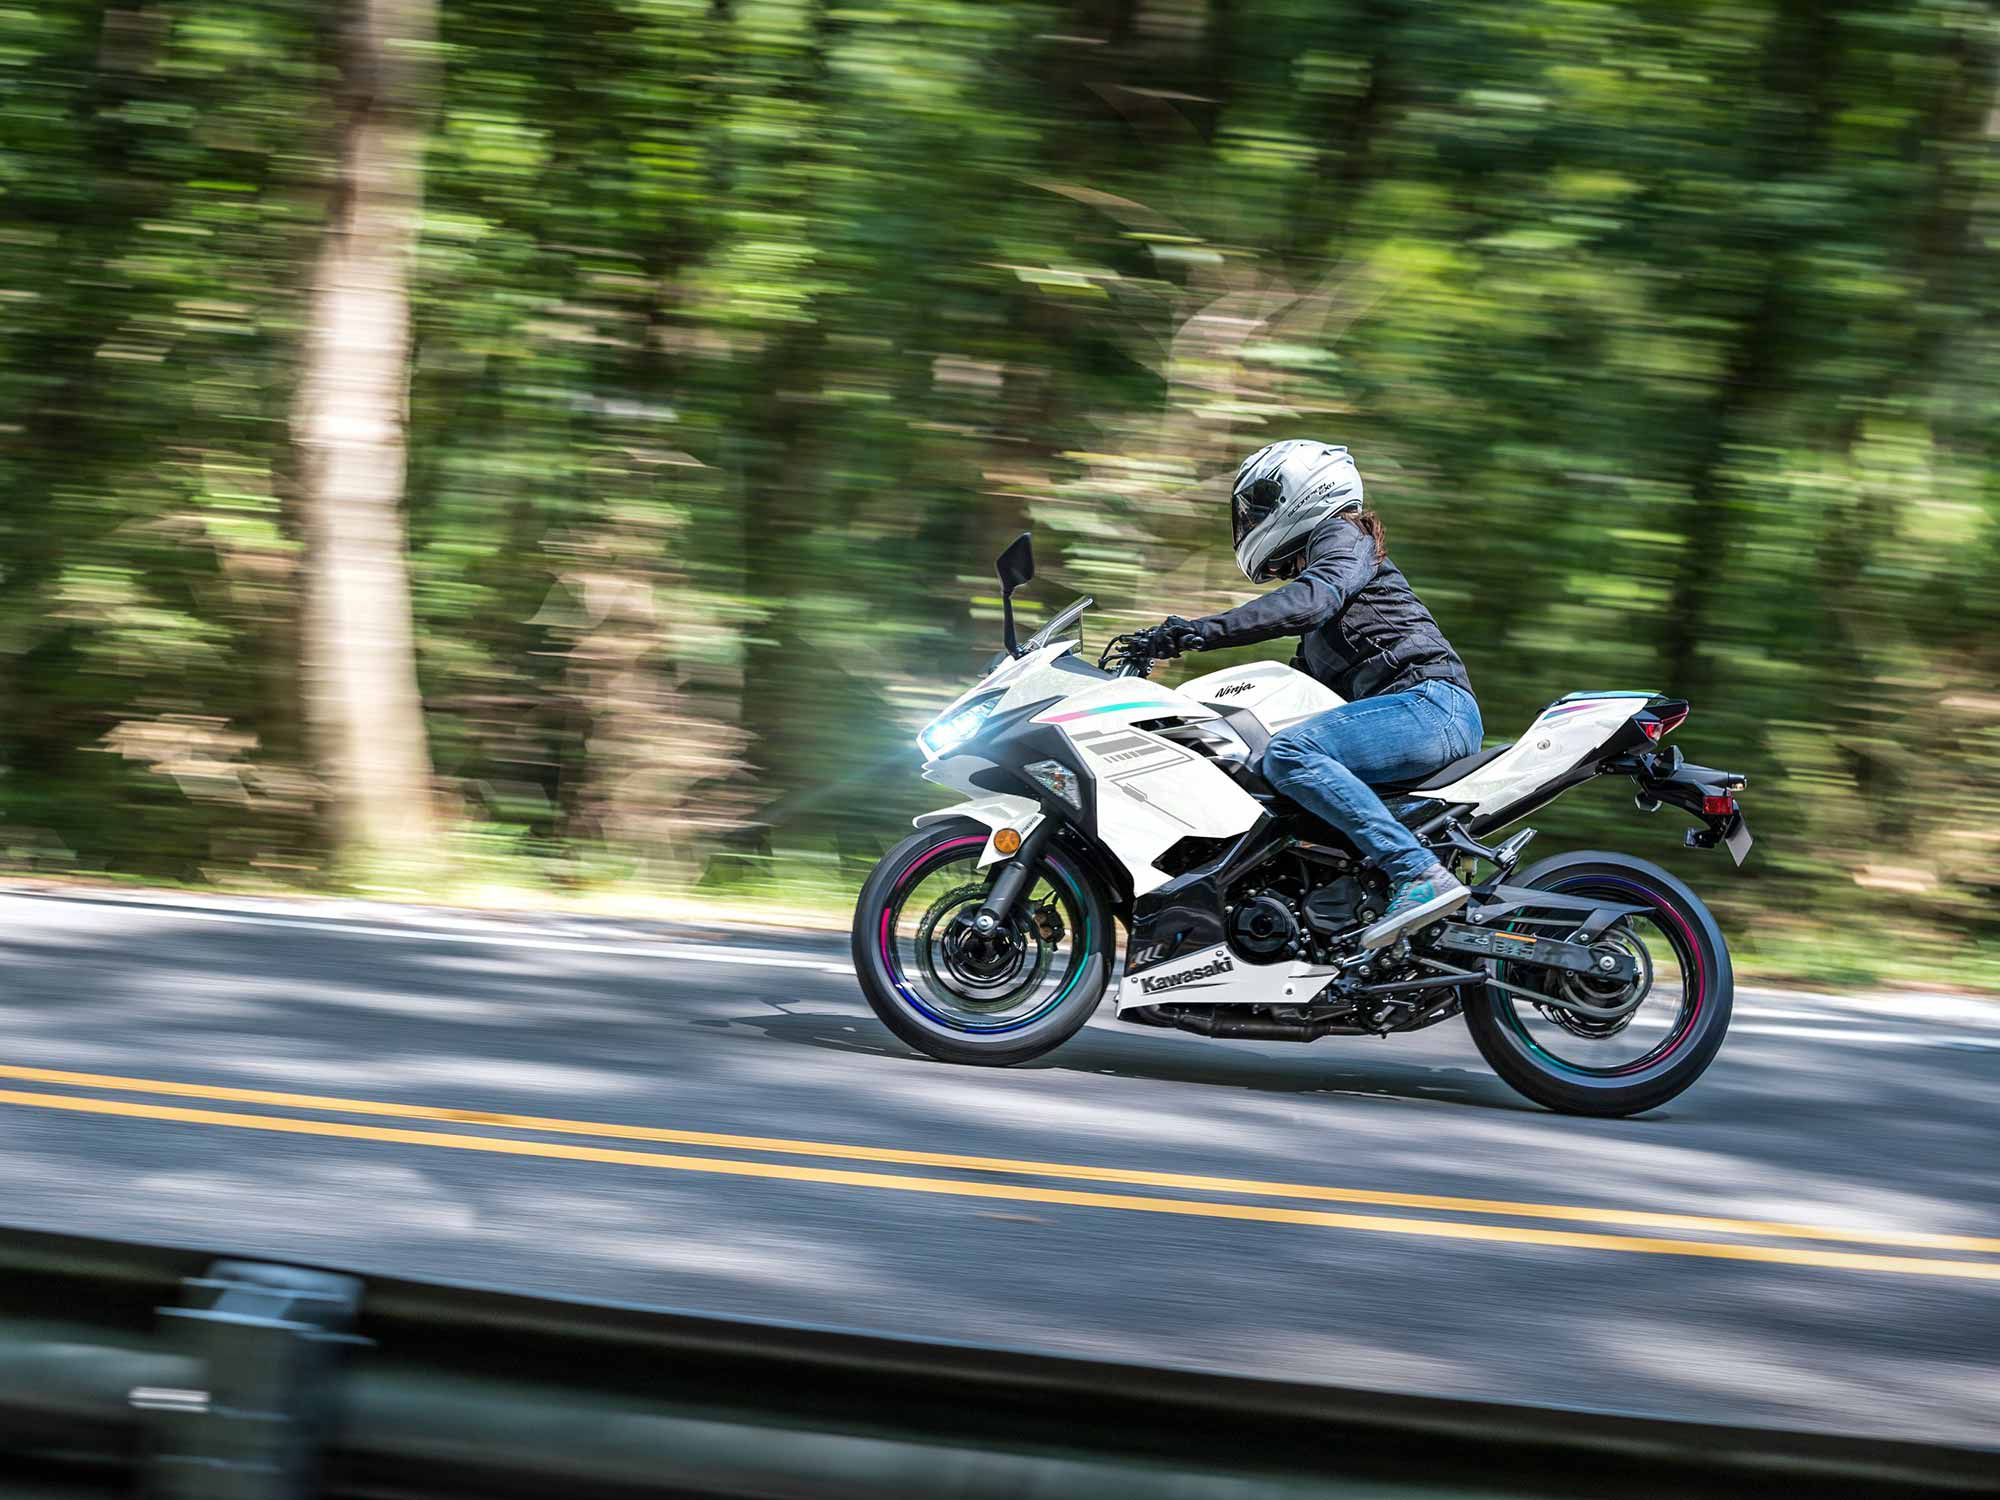 The Ninja 400 has a wide appeal across the whole skill spectrum.